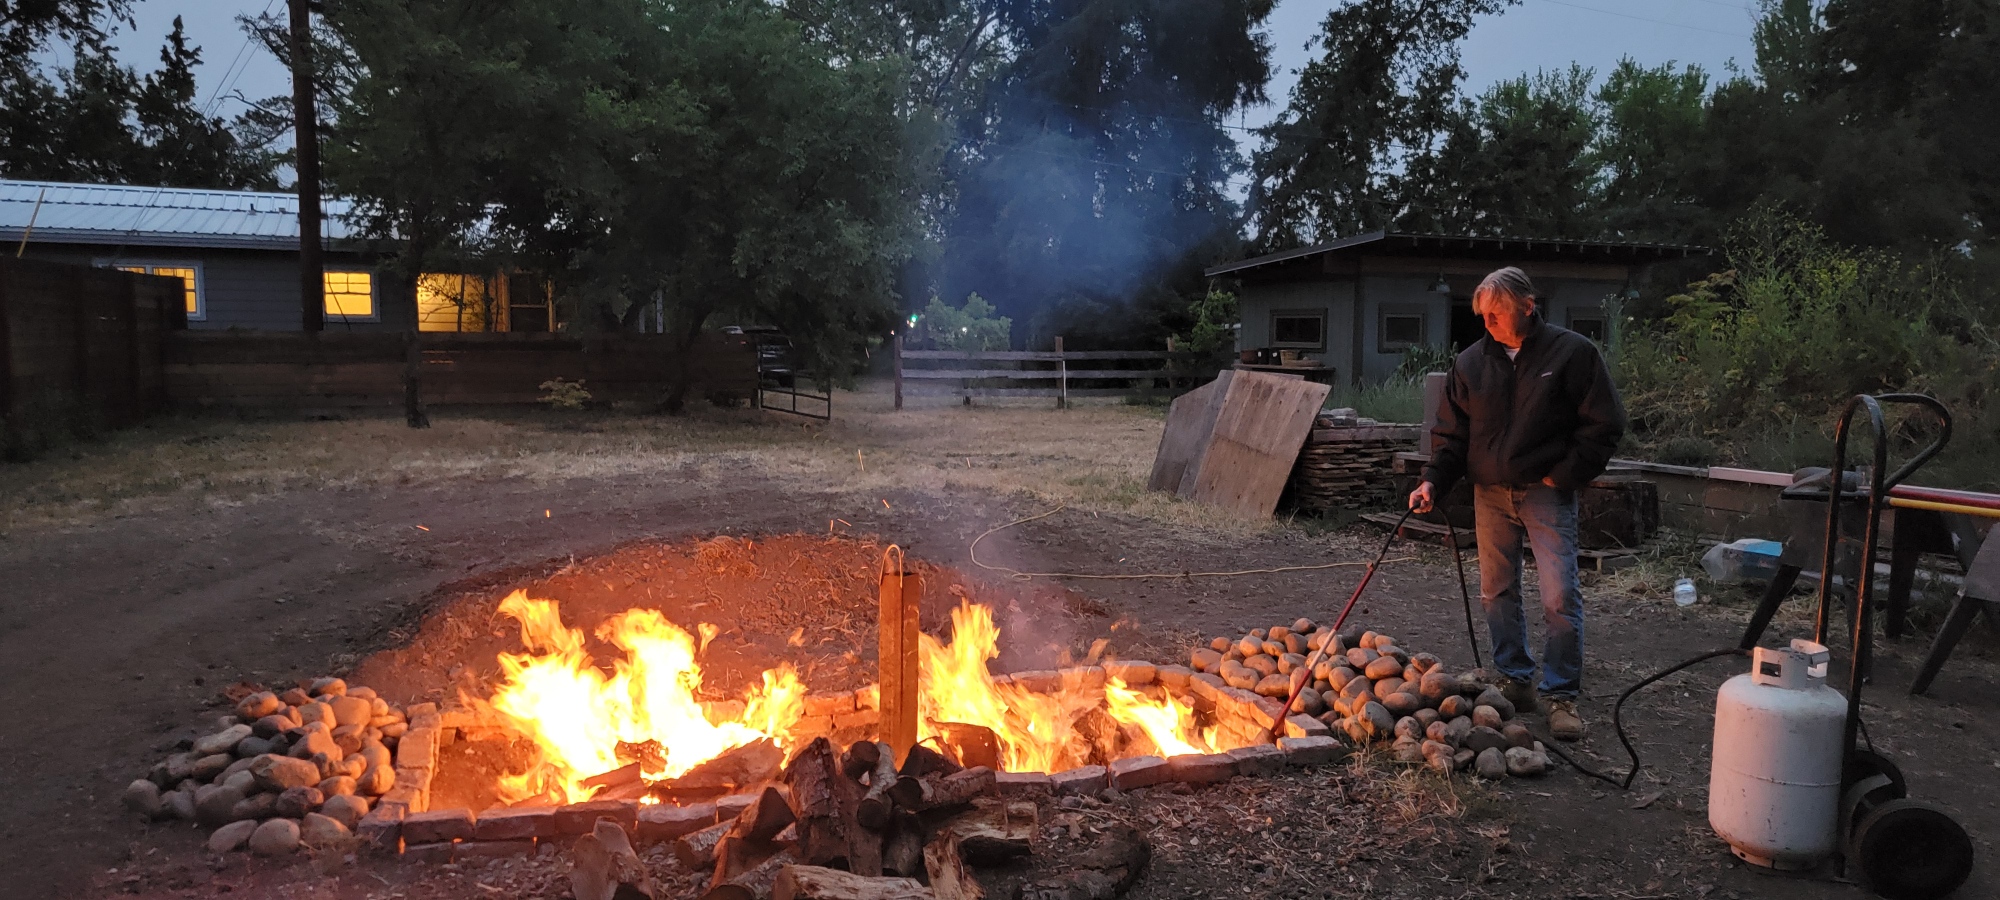 Lighting the fire, at 5:30am